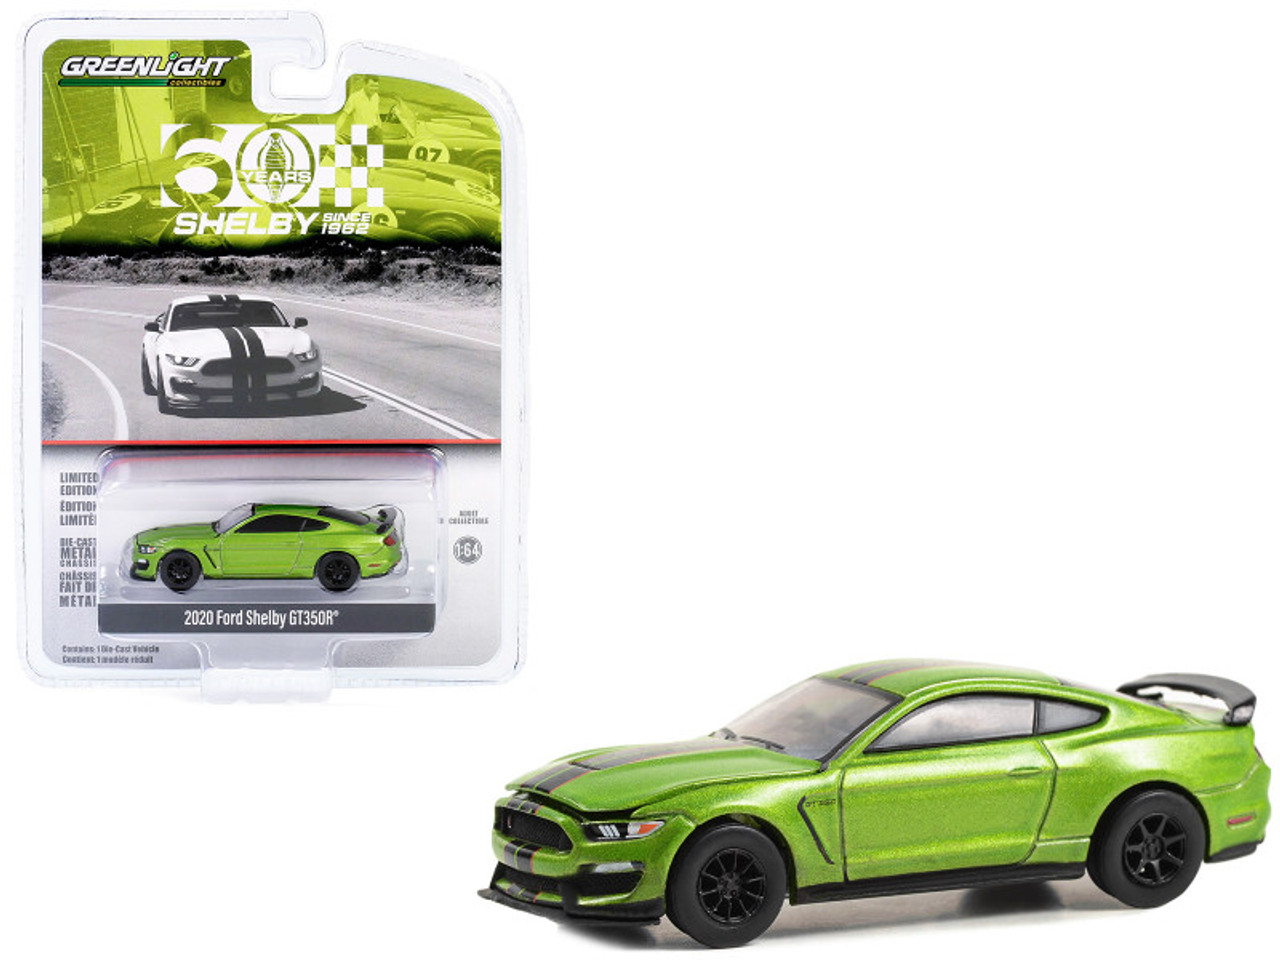 2020 Ford Shelby GT350R Lime Green Metallic with Black Stripes "Shelby 60 Years Since 1962" "Anniversary Collection" Series 16 1/64 Diecast Model Car by Greenlight